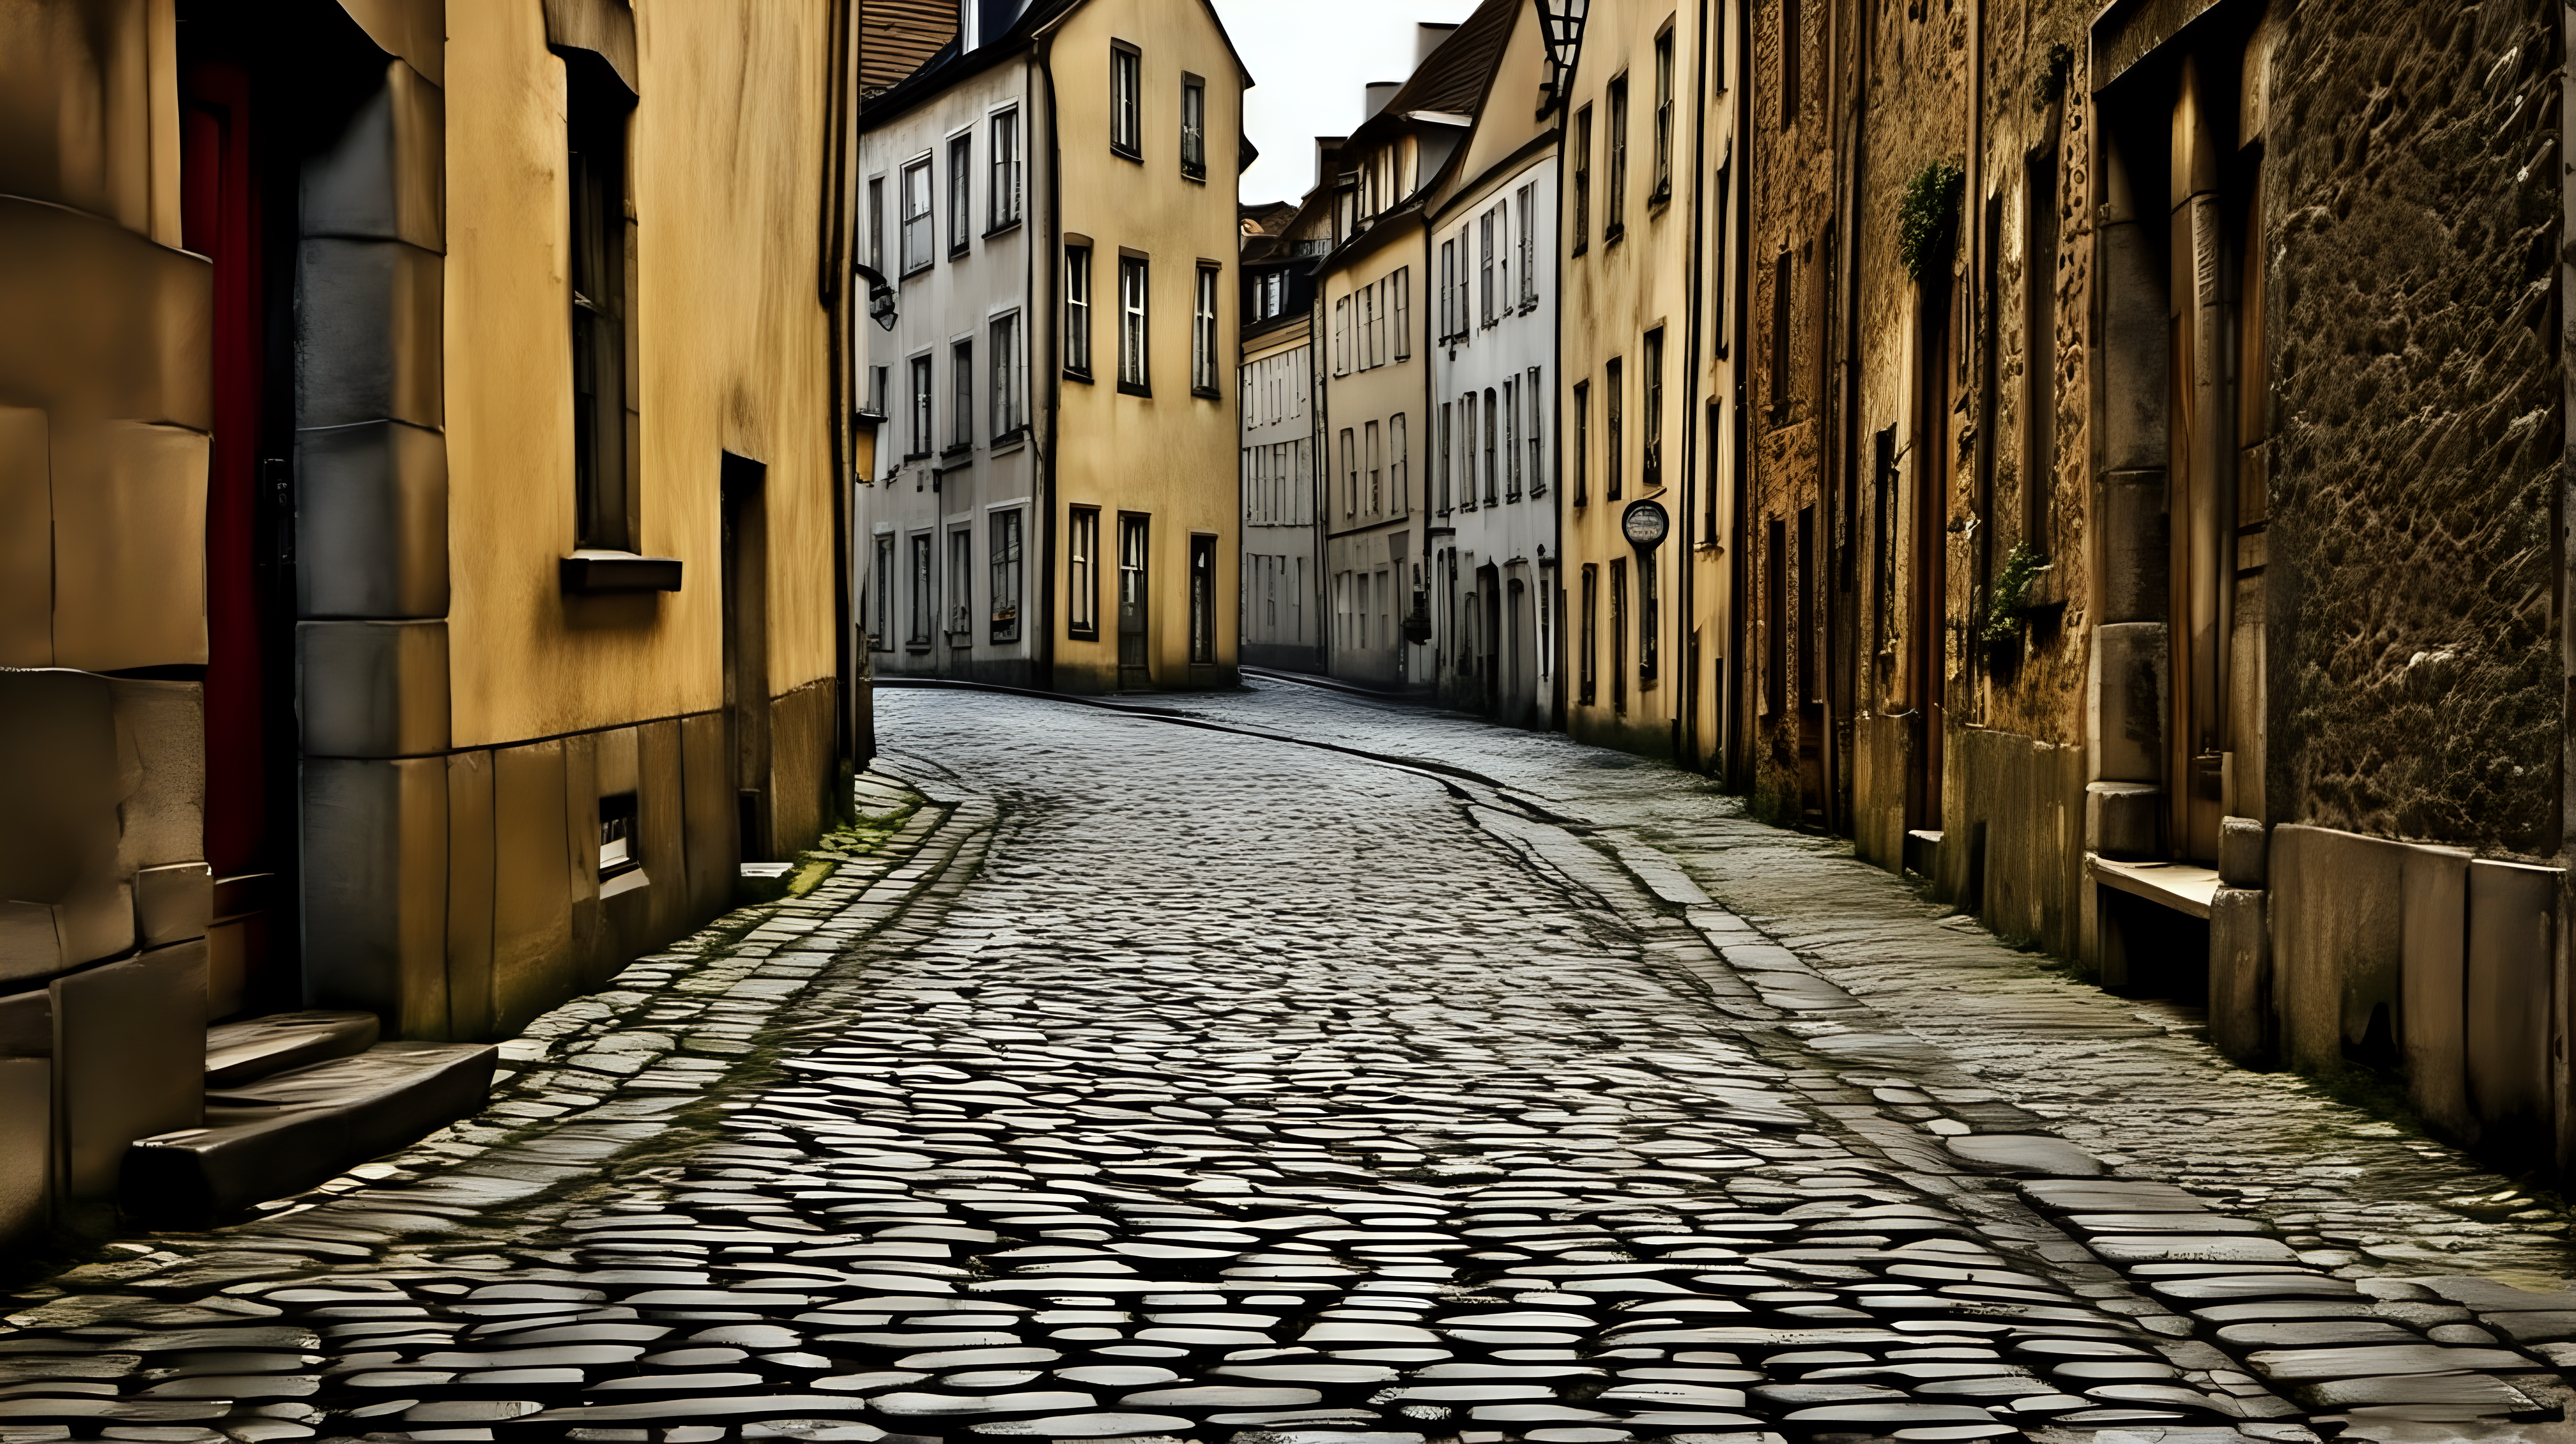 An aged cobblestone street in an old European town, worn by the passage of time and history. The stones, weathered and irregular, create a captivating and nostalgic scene. Weathered, Timeless, Historic, Textured, Evocative. DSLR camera. Prime lens for detailed shots. Late afternoon, when soft, warm sunlight casts elongated shadows and highlights the textures of the cobblestones. Focus on the unique textures, patterns, and irregularities of the cobblestones, capturing the timeless beauty and historical character. Experiment with angles and perspectives to showcase the weathered details and the interplay of light and shadow on the uneven surface. Aim for high-resolution digital images to capture the intricate details and textures of the cobblestones. Post-processing can emphasize the aged, textured feel of the stones while retaining the nostalgic allure of the scene.